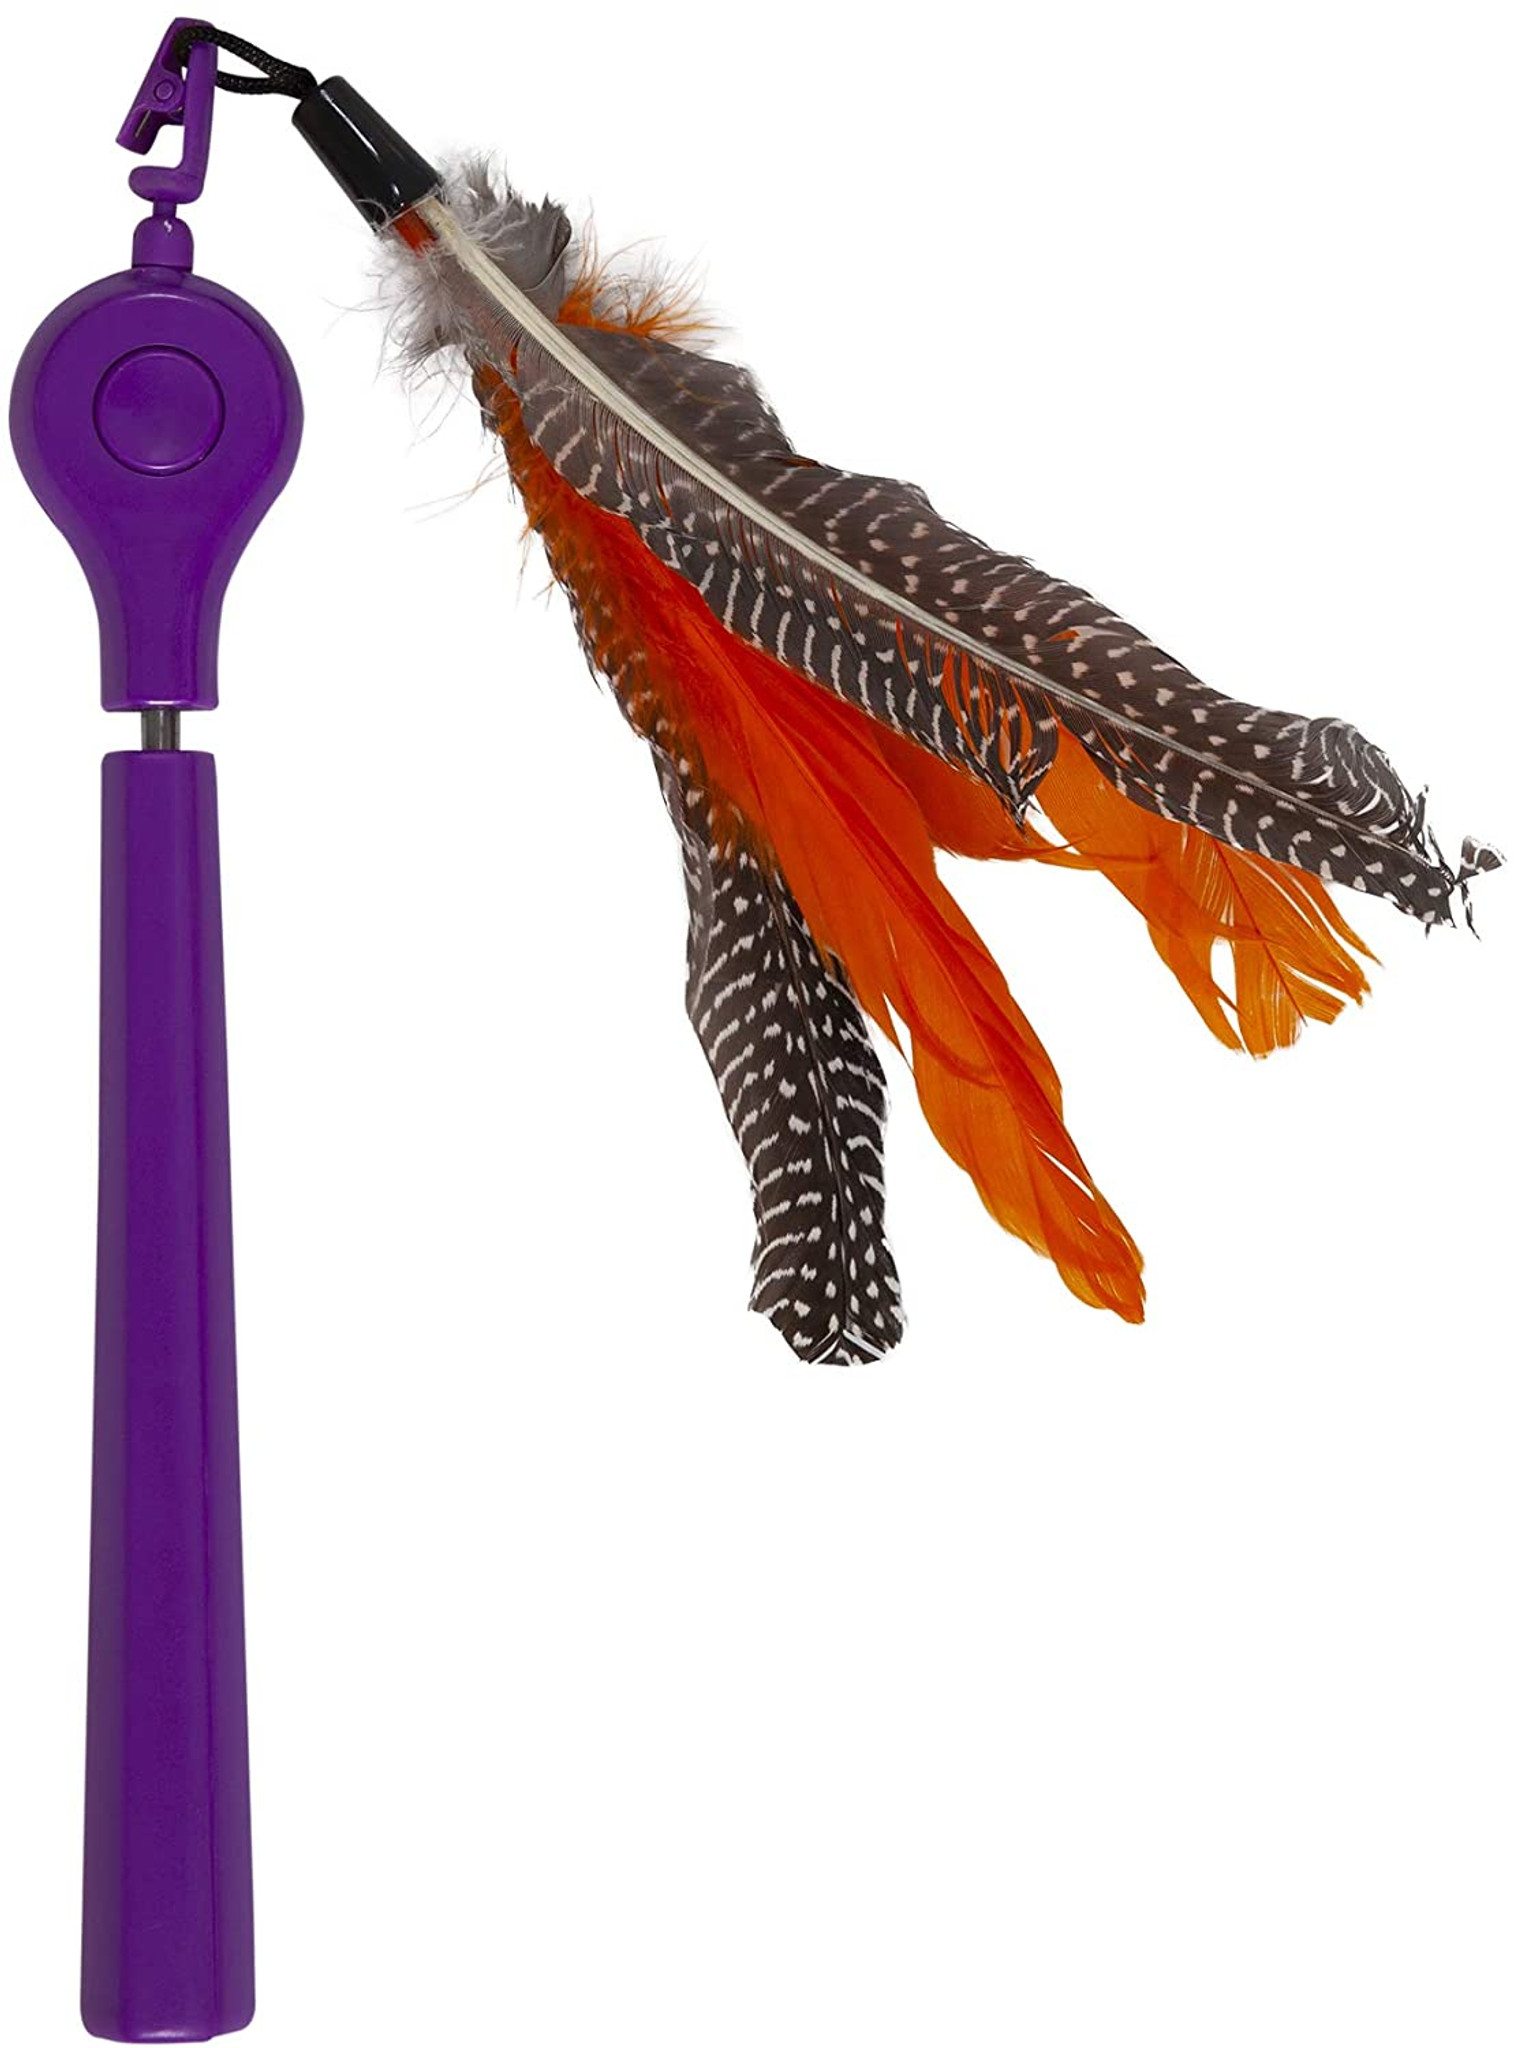 Petmate Toy Jackson Galaxy Mojo Maker Cat Air Wand Telescoping Feature Cat Toy 